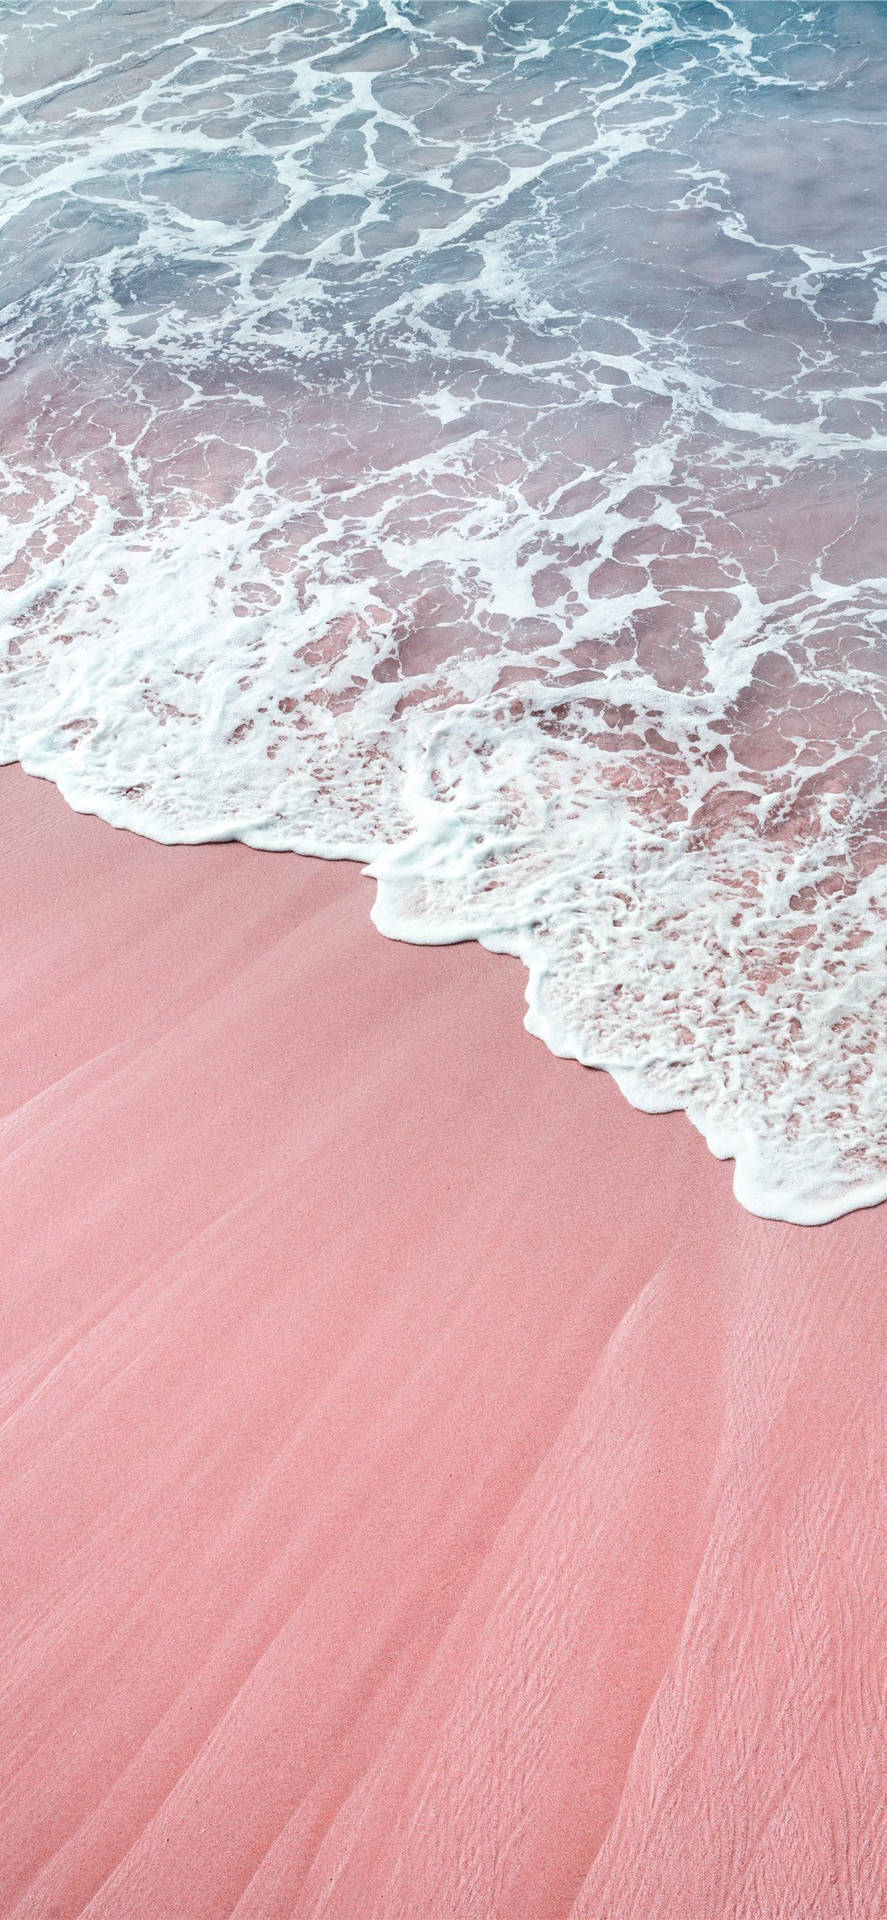 Rose Gold Ipad Beach With Crystal Water Picture